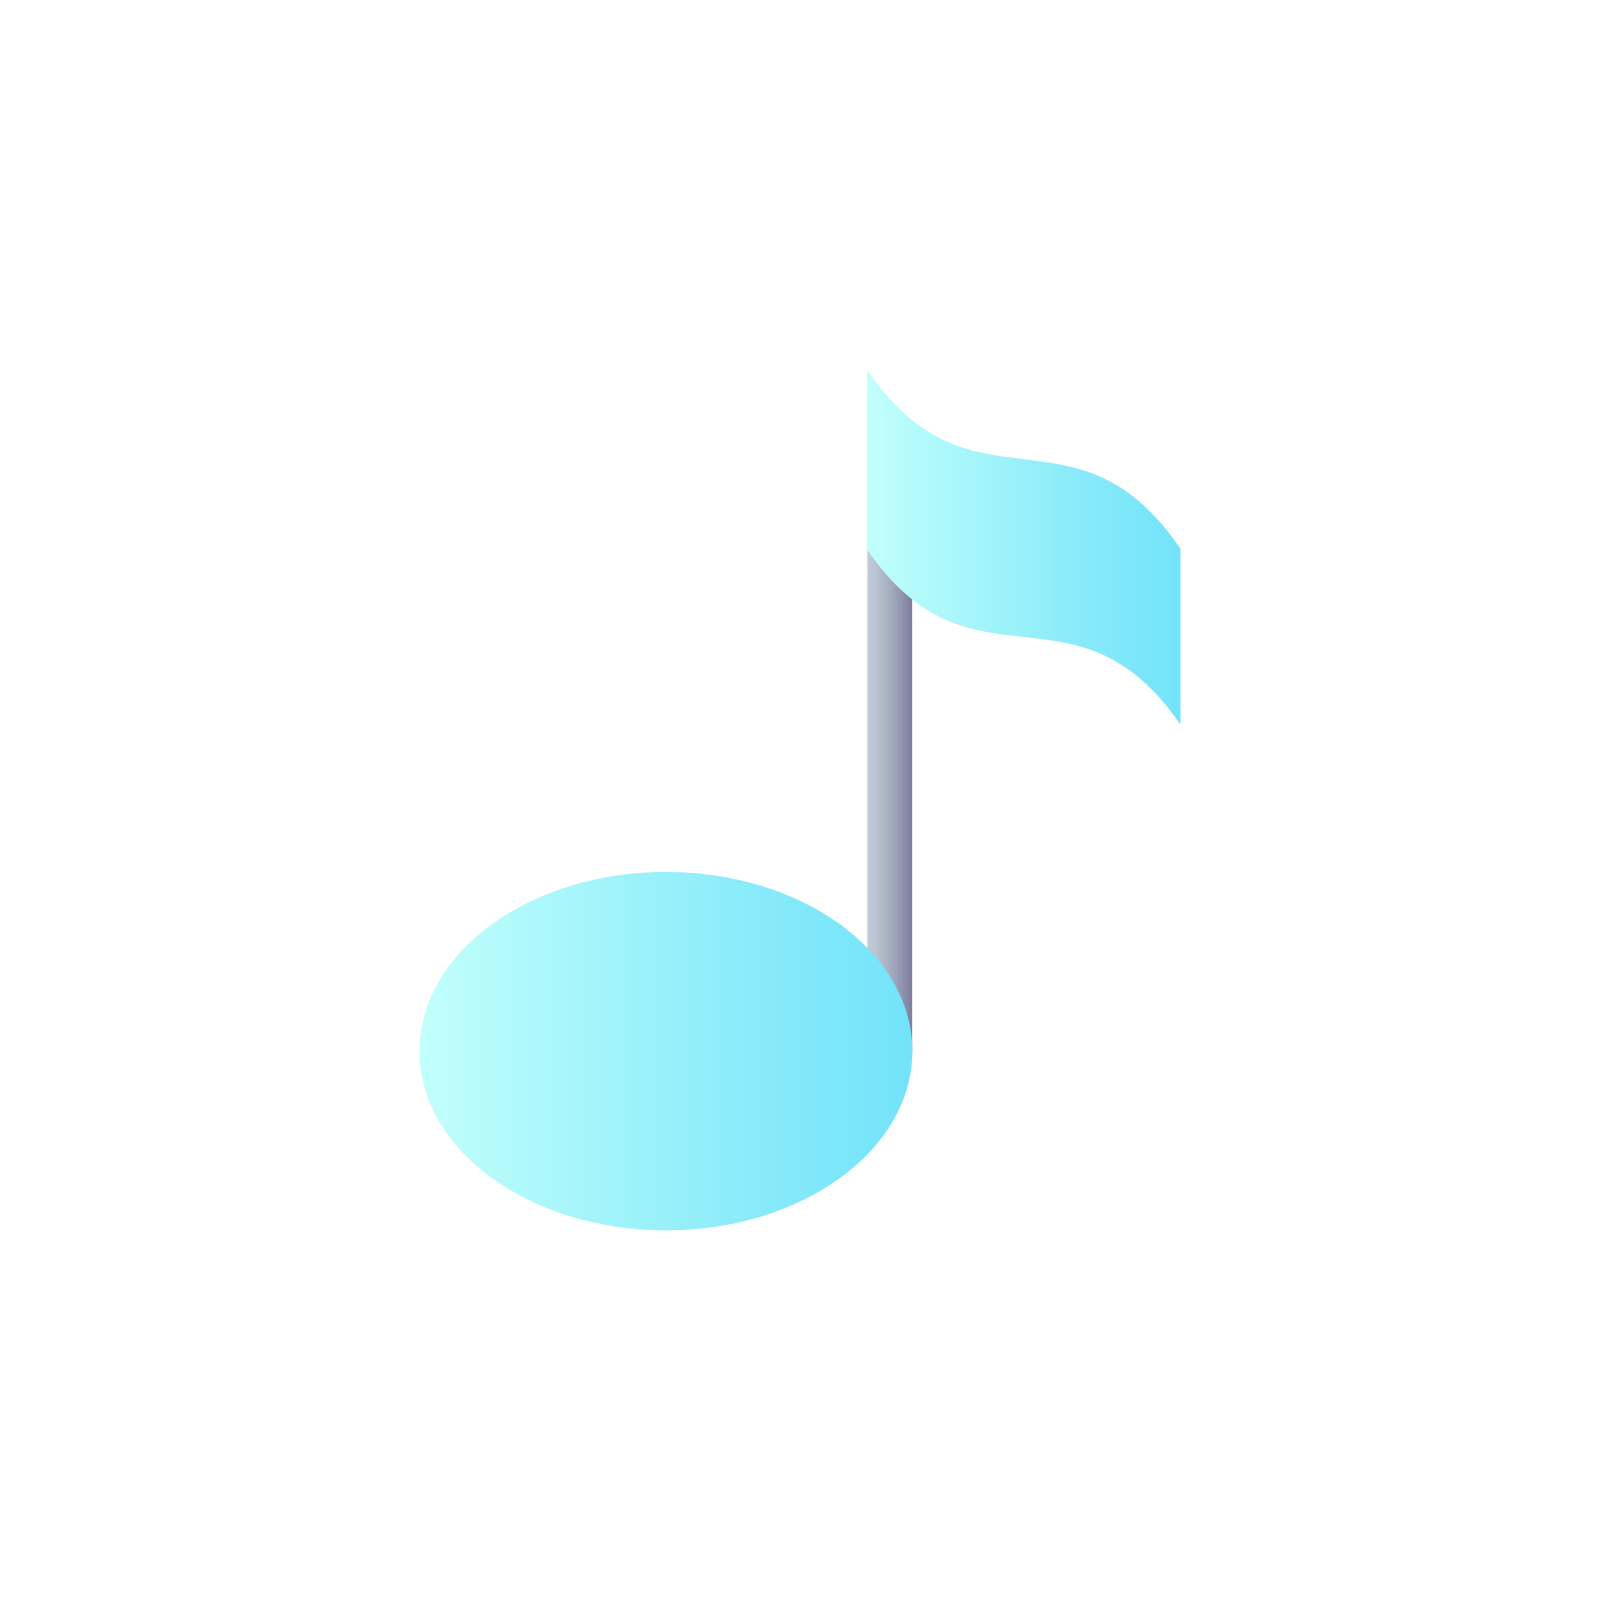 external Musical-Note-photo-and-video-flat-glyph-papa-vector icon